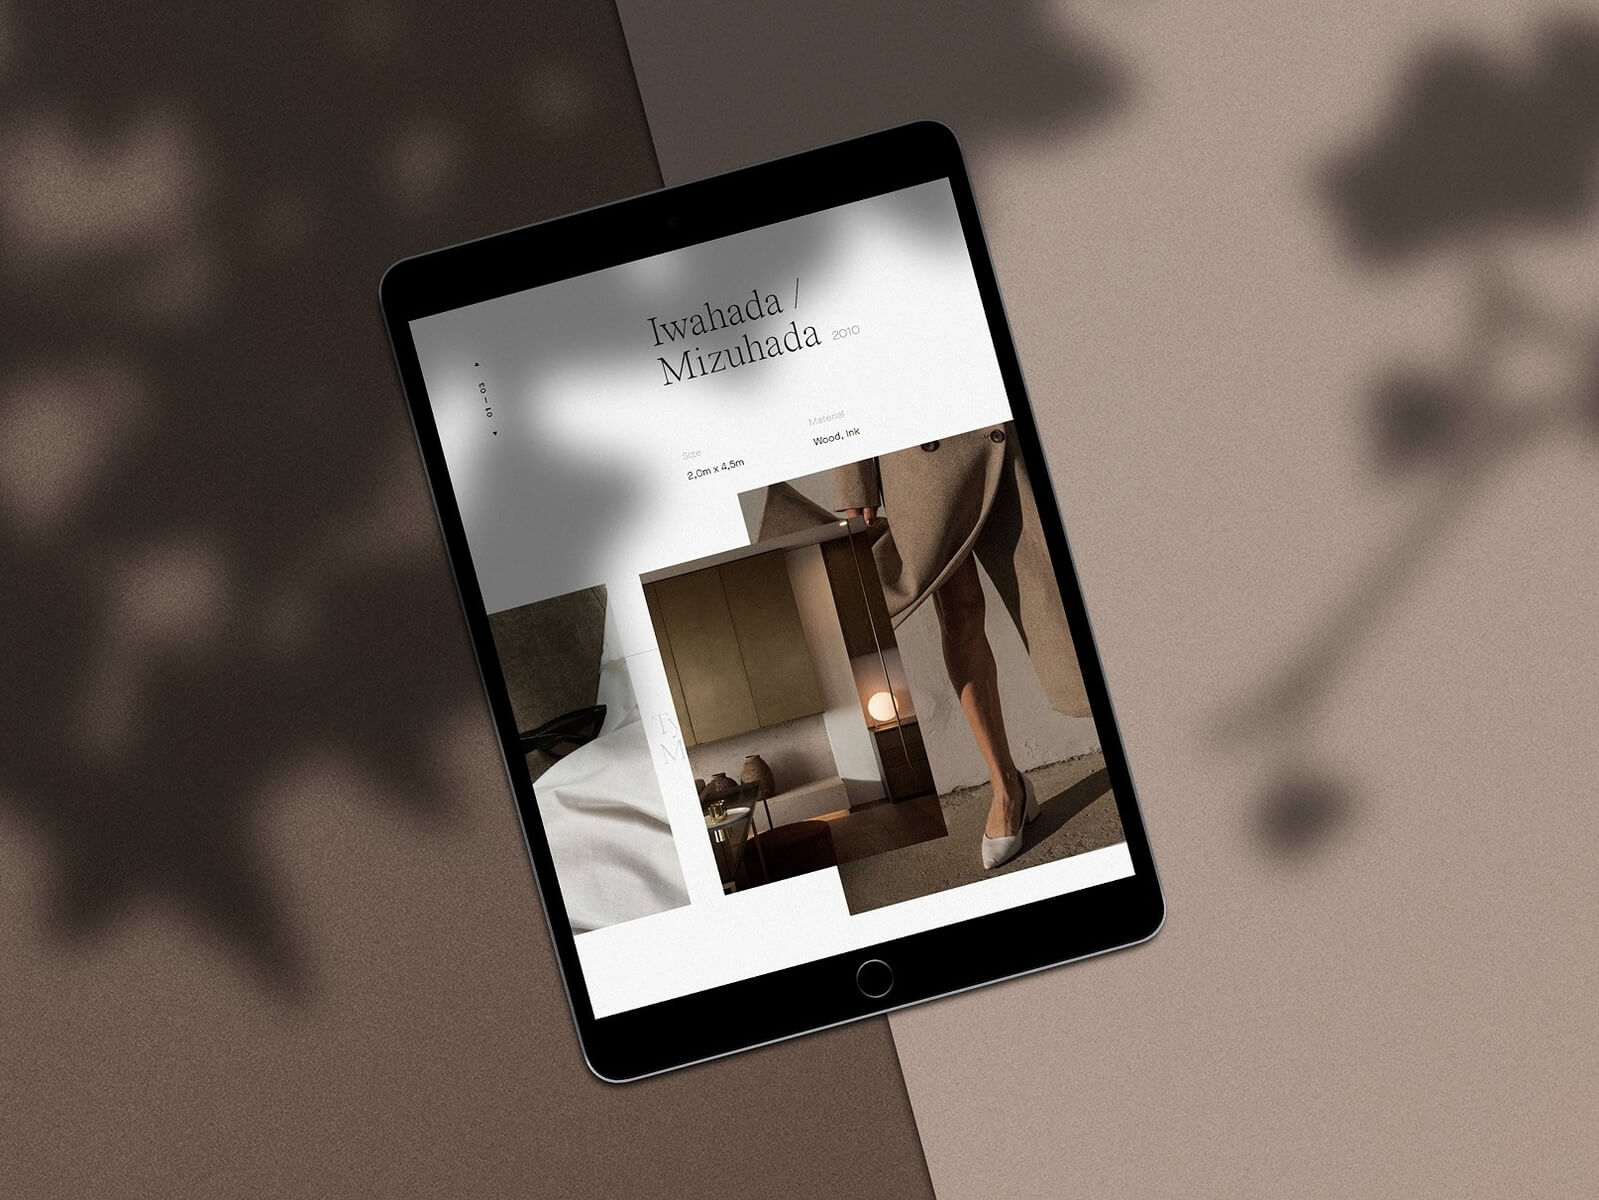 Download 20 Best Free iPad Mockups and Templates PSD+Sketch in 2019 PSD Mockup Templates